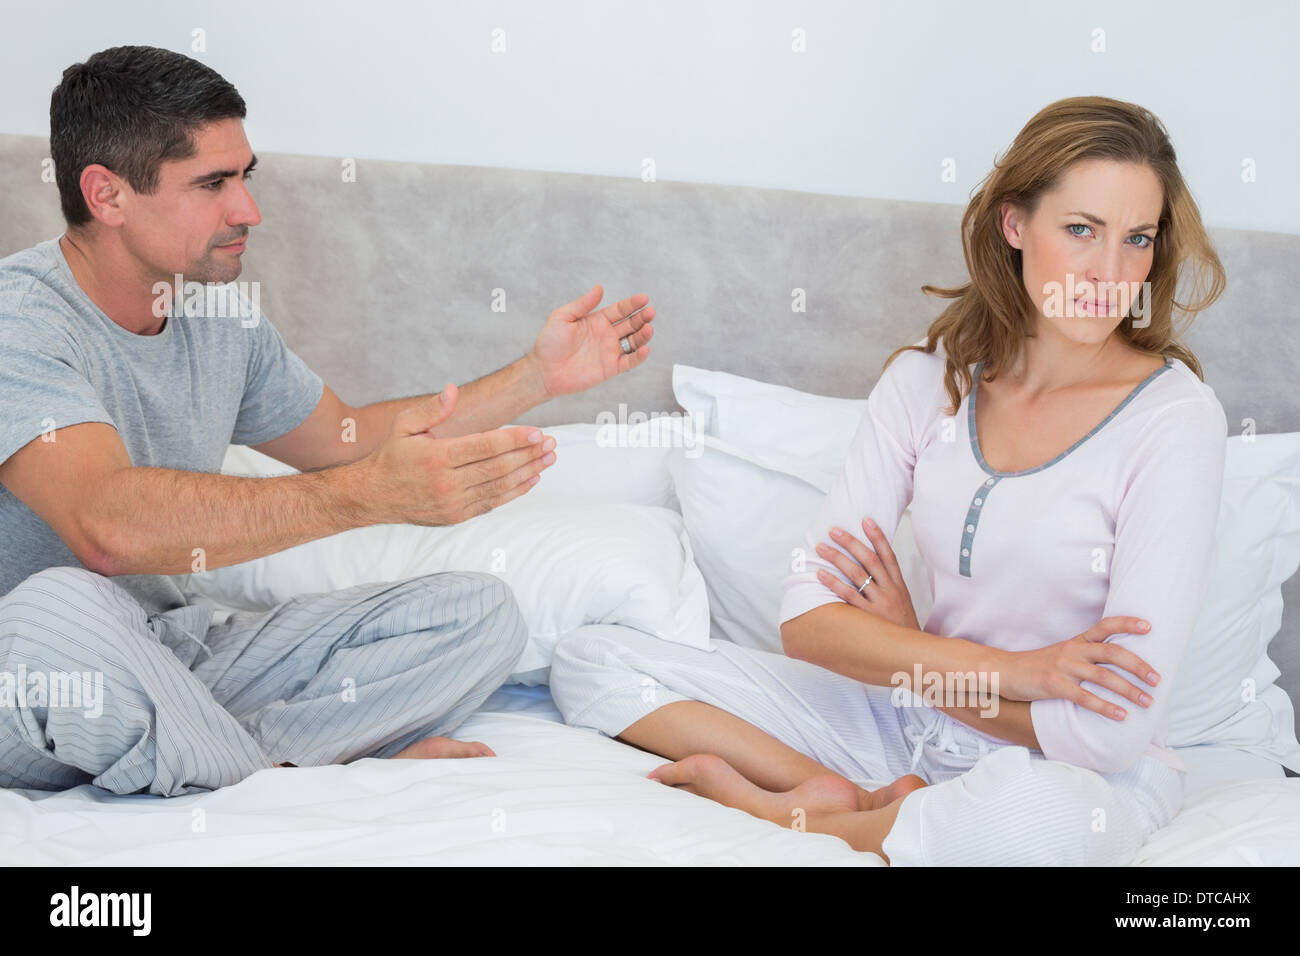 Woman arguing with man Stock Photo